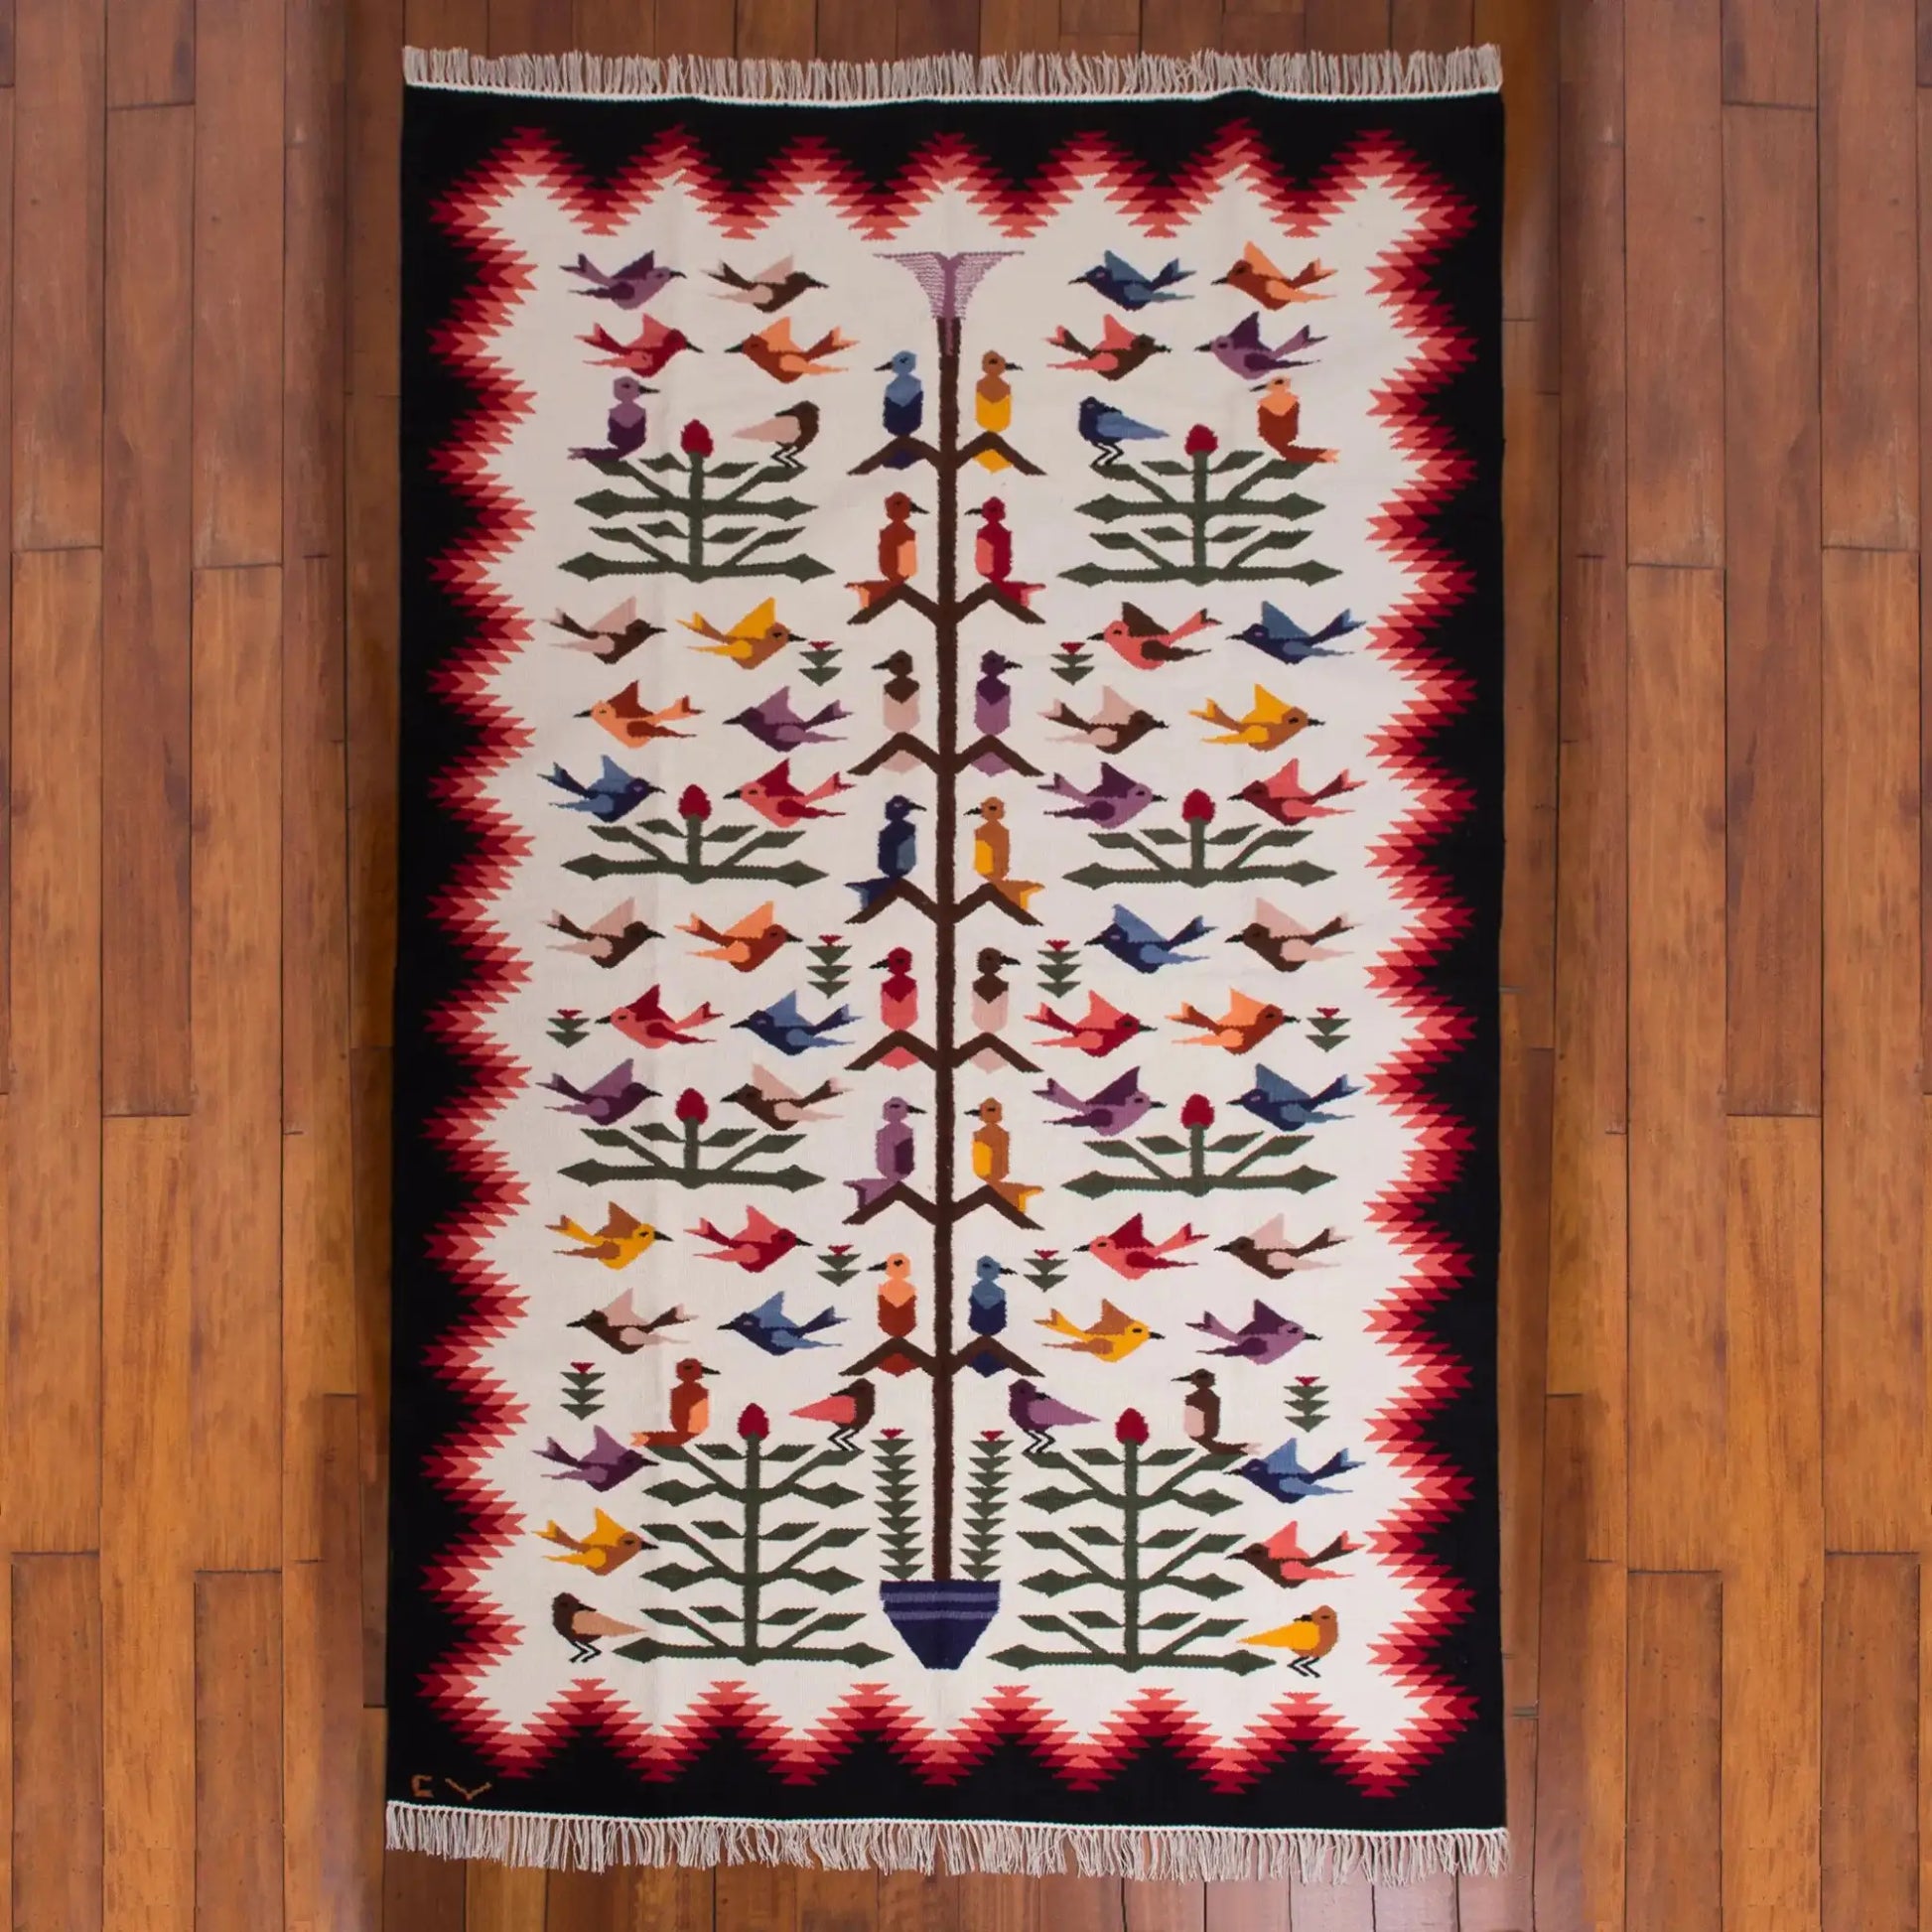 Colibrí - Exquisitely Handcrafted Bird Area Rug 6’x8’ - Art